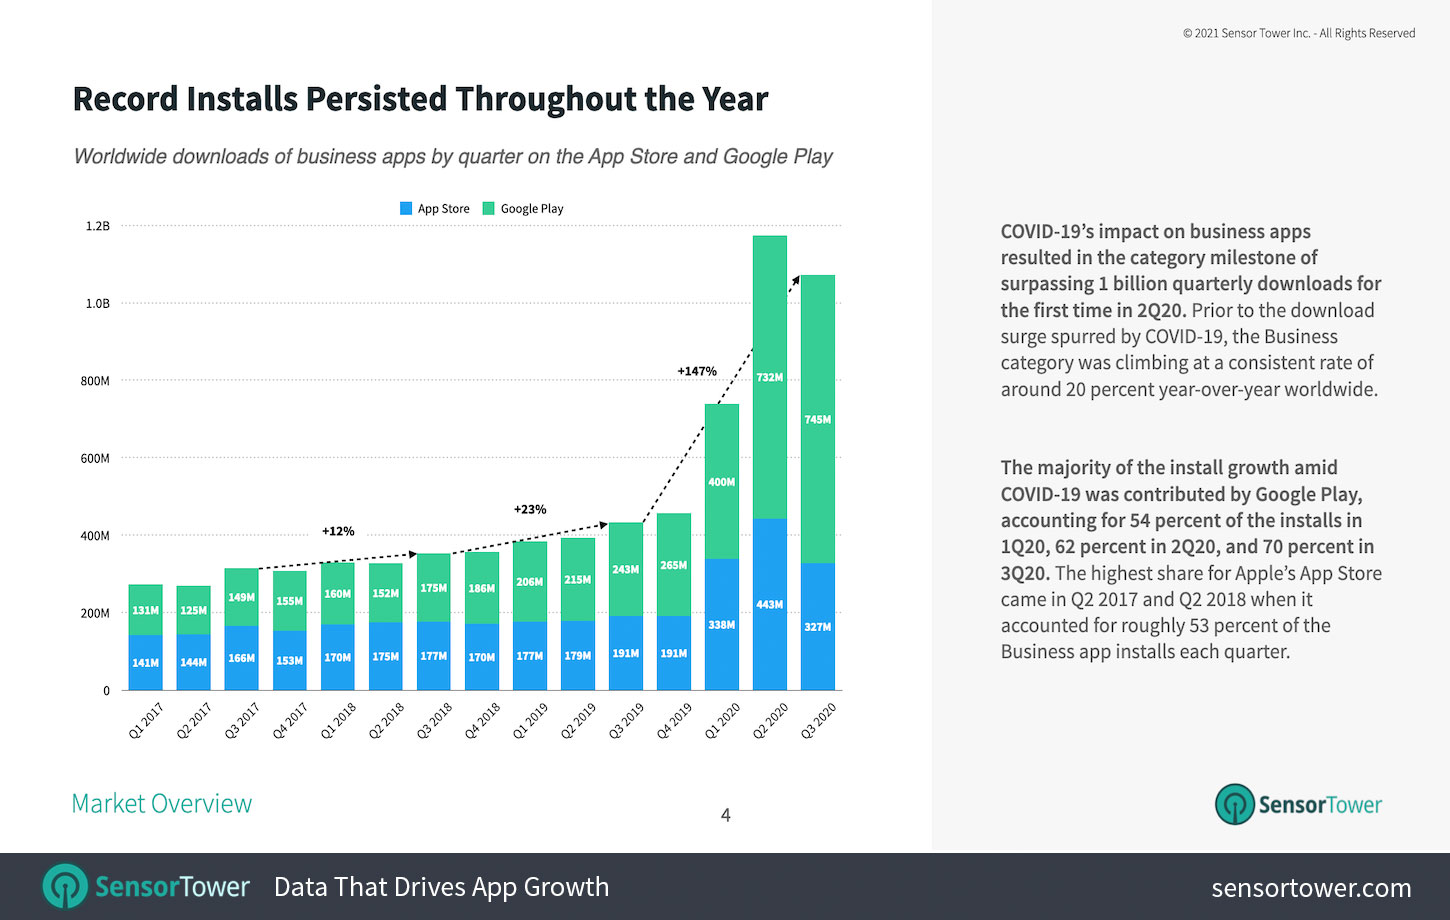 Business apps saw record installs globally in 2020 due to COVID-19.